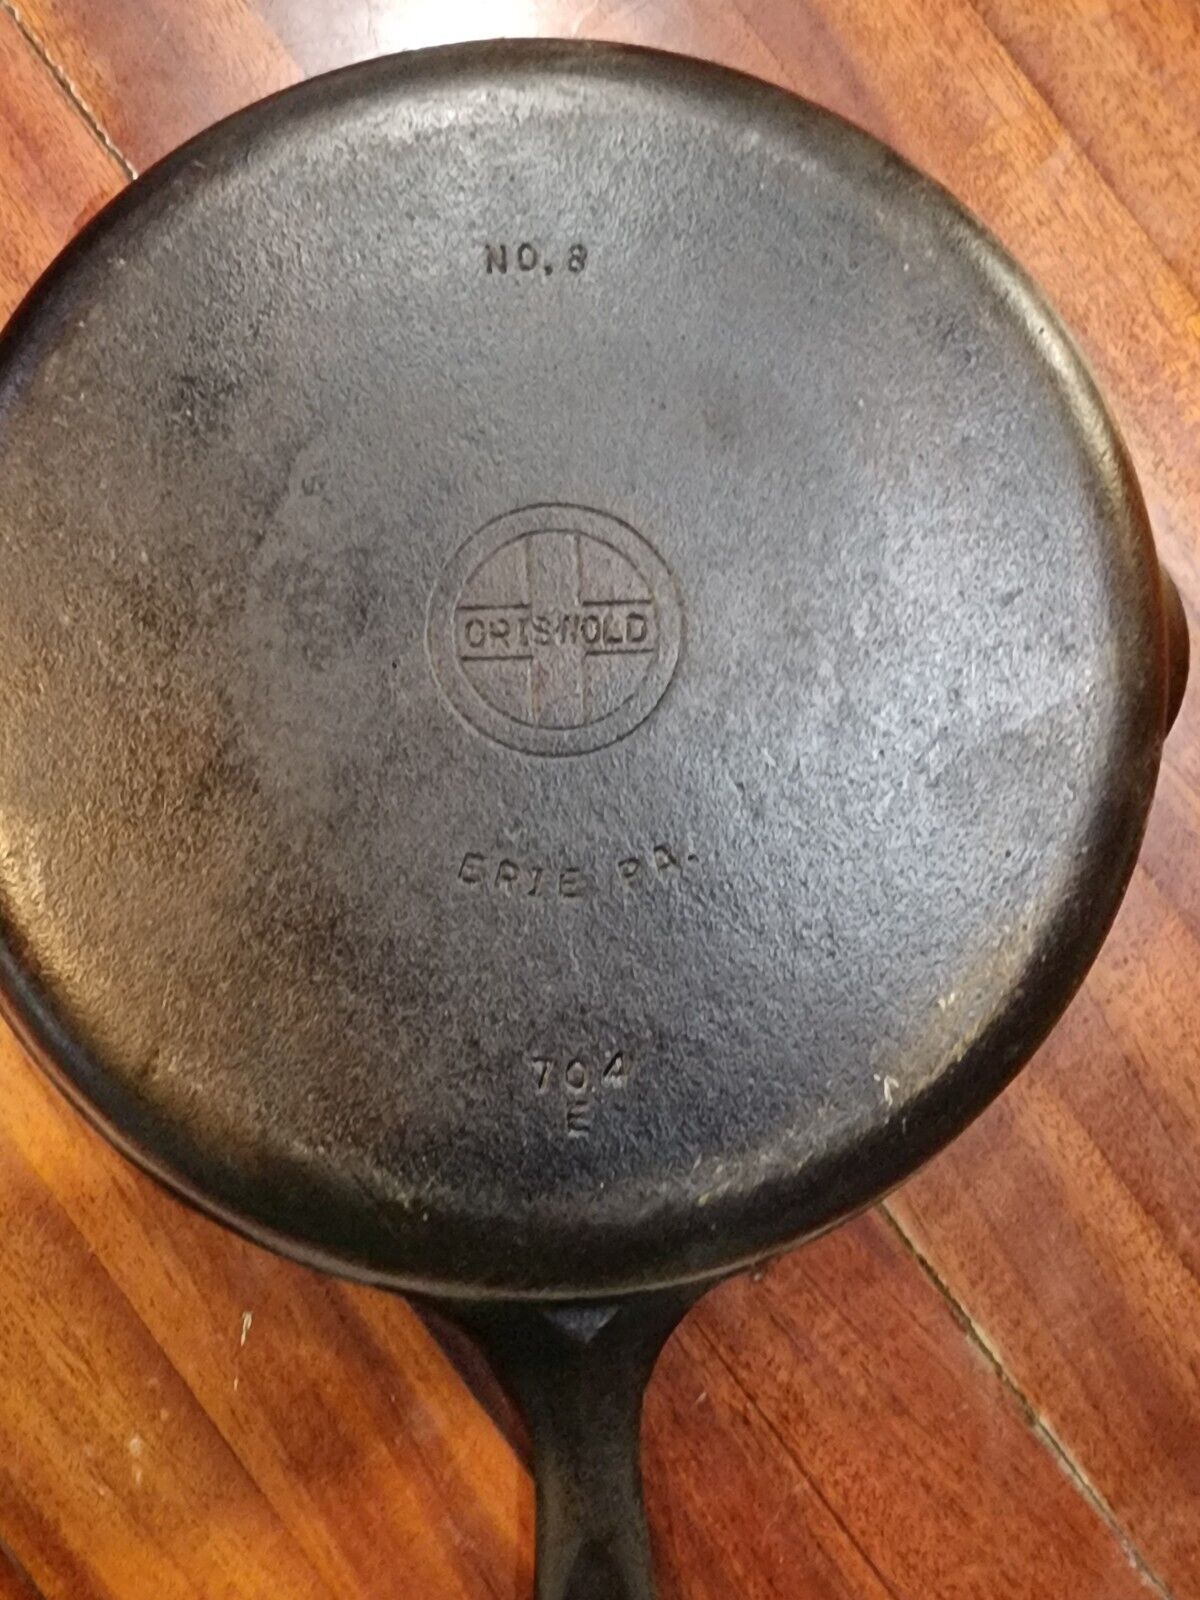 Vintage GRISWOLD Cast Iron SKILLET Frying Pan # 8 SMALL BLOCK LOGO 